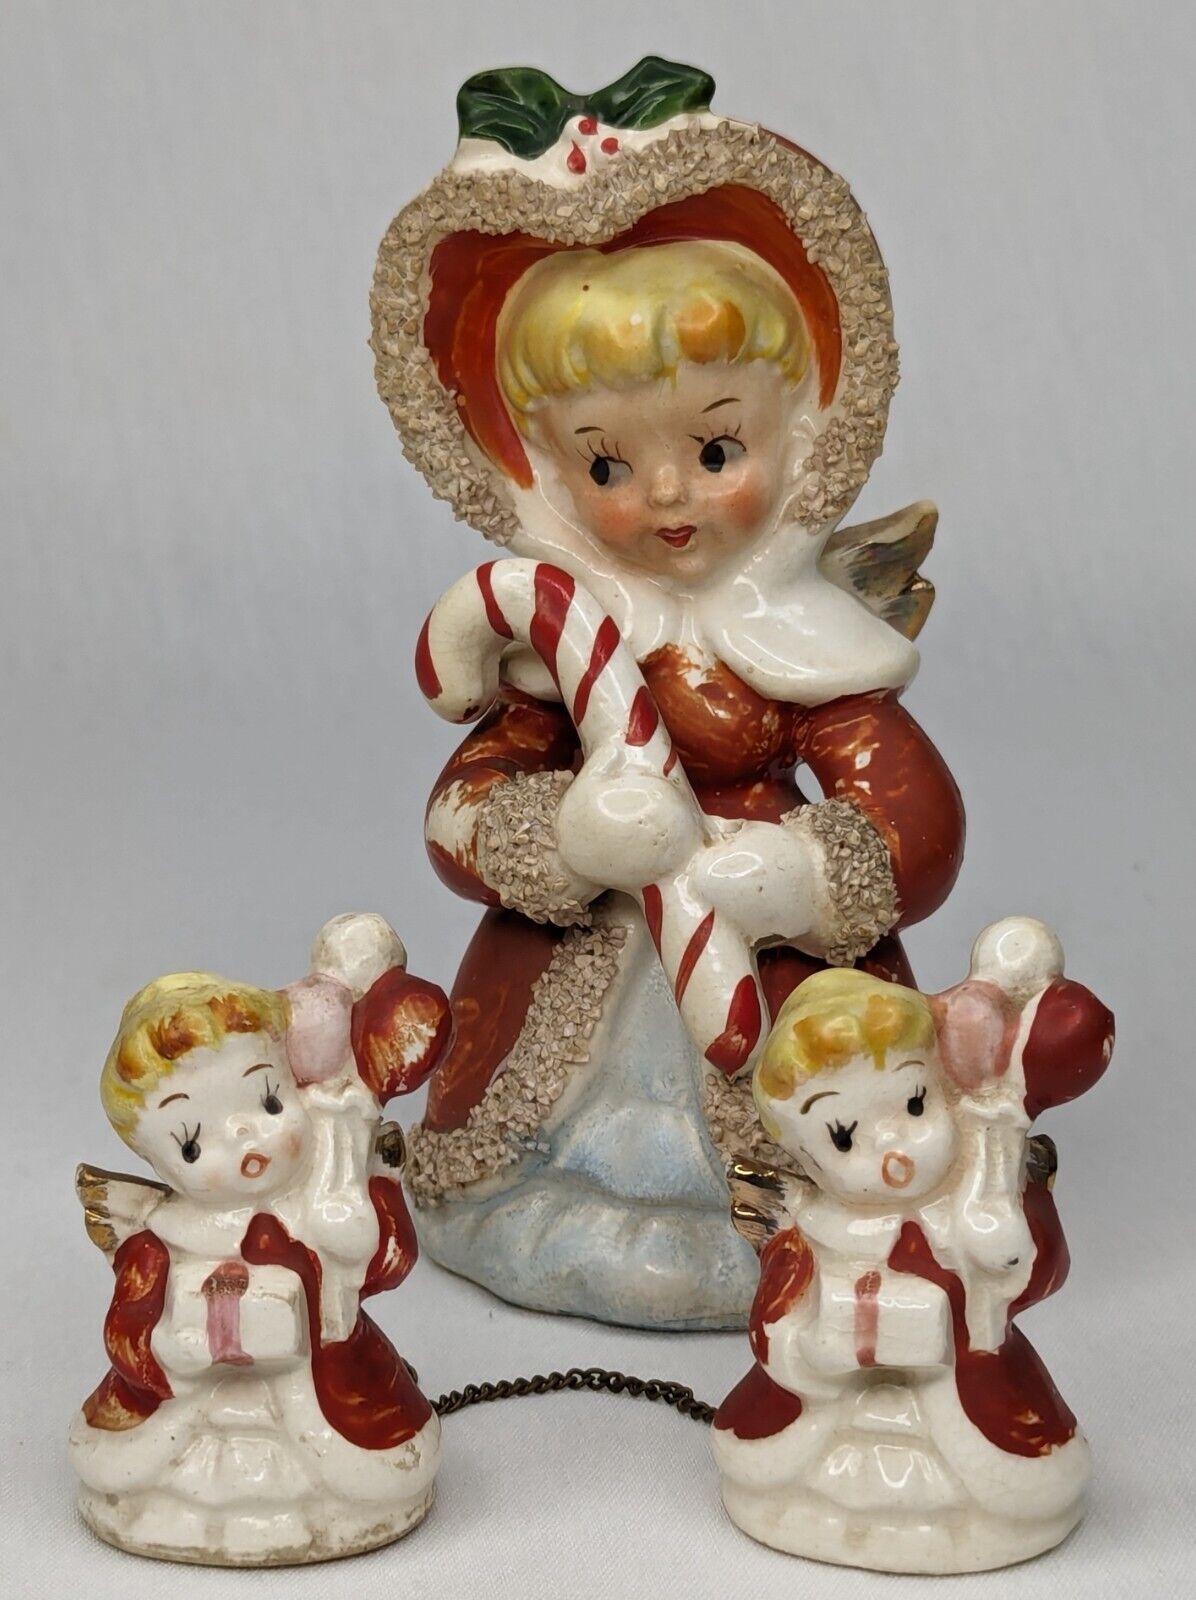 Vintage Tilso Japan Ceramic Christmas Angel w/ Candy Cane & Chained Baby Angels